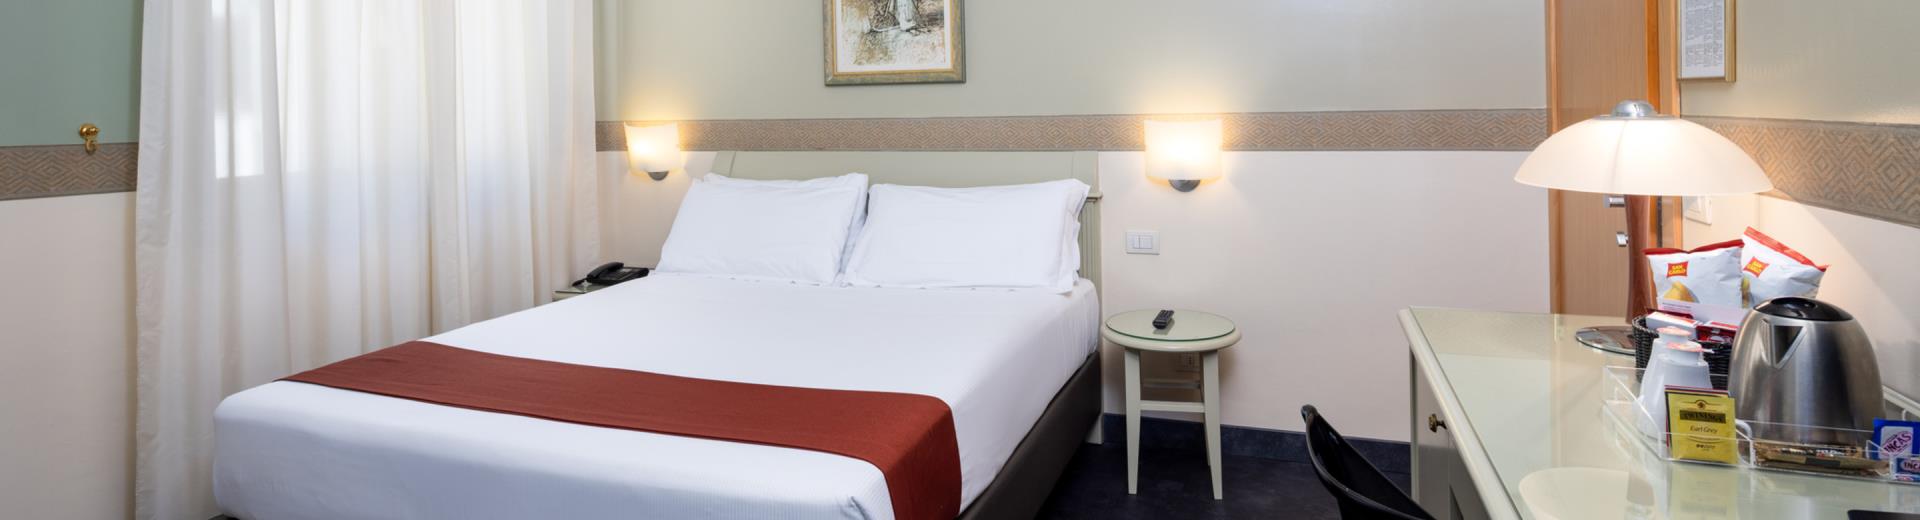 Double room at the Best Western Hotel Major in Milan. Comfortable and welcoming, it is equipped with a 32-inch LCD satellite TV with radio and alarm clock, free Wi-Fi internet and minibar.